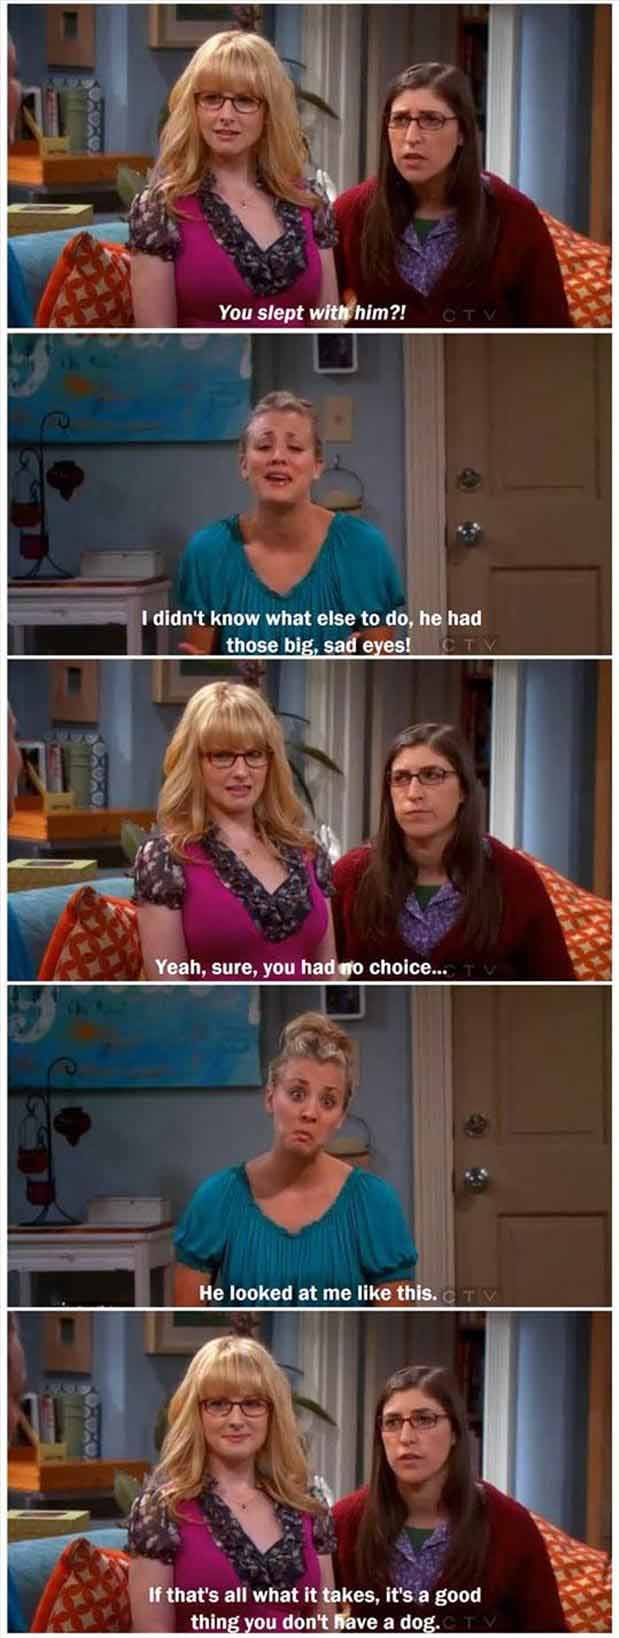 its a good thing you don't own a dog big bang theory funny quotes